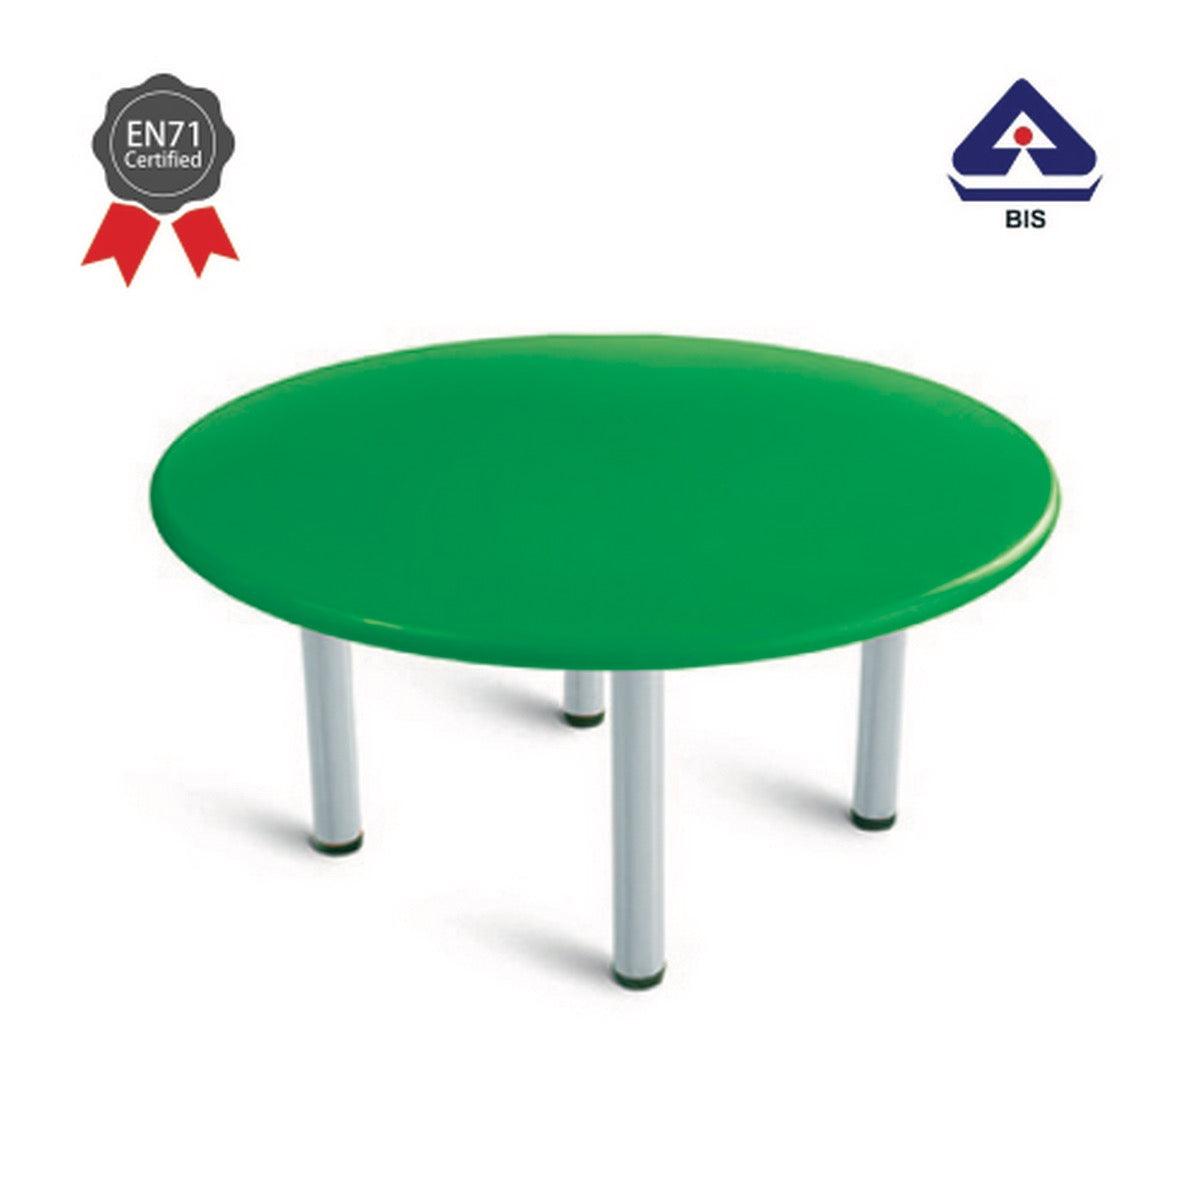 Ok Play Round Table For Kids, Round And Smooth Edges For The Safety, Perfect For Home And School, Green, 2 to 4 Years